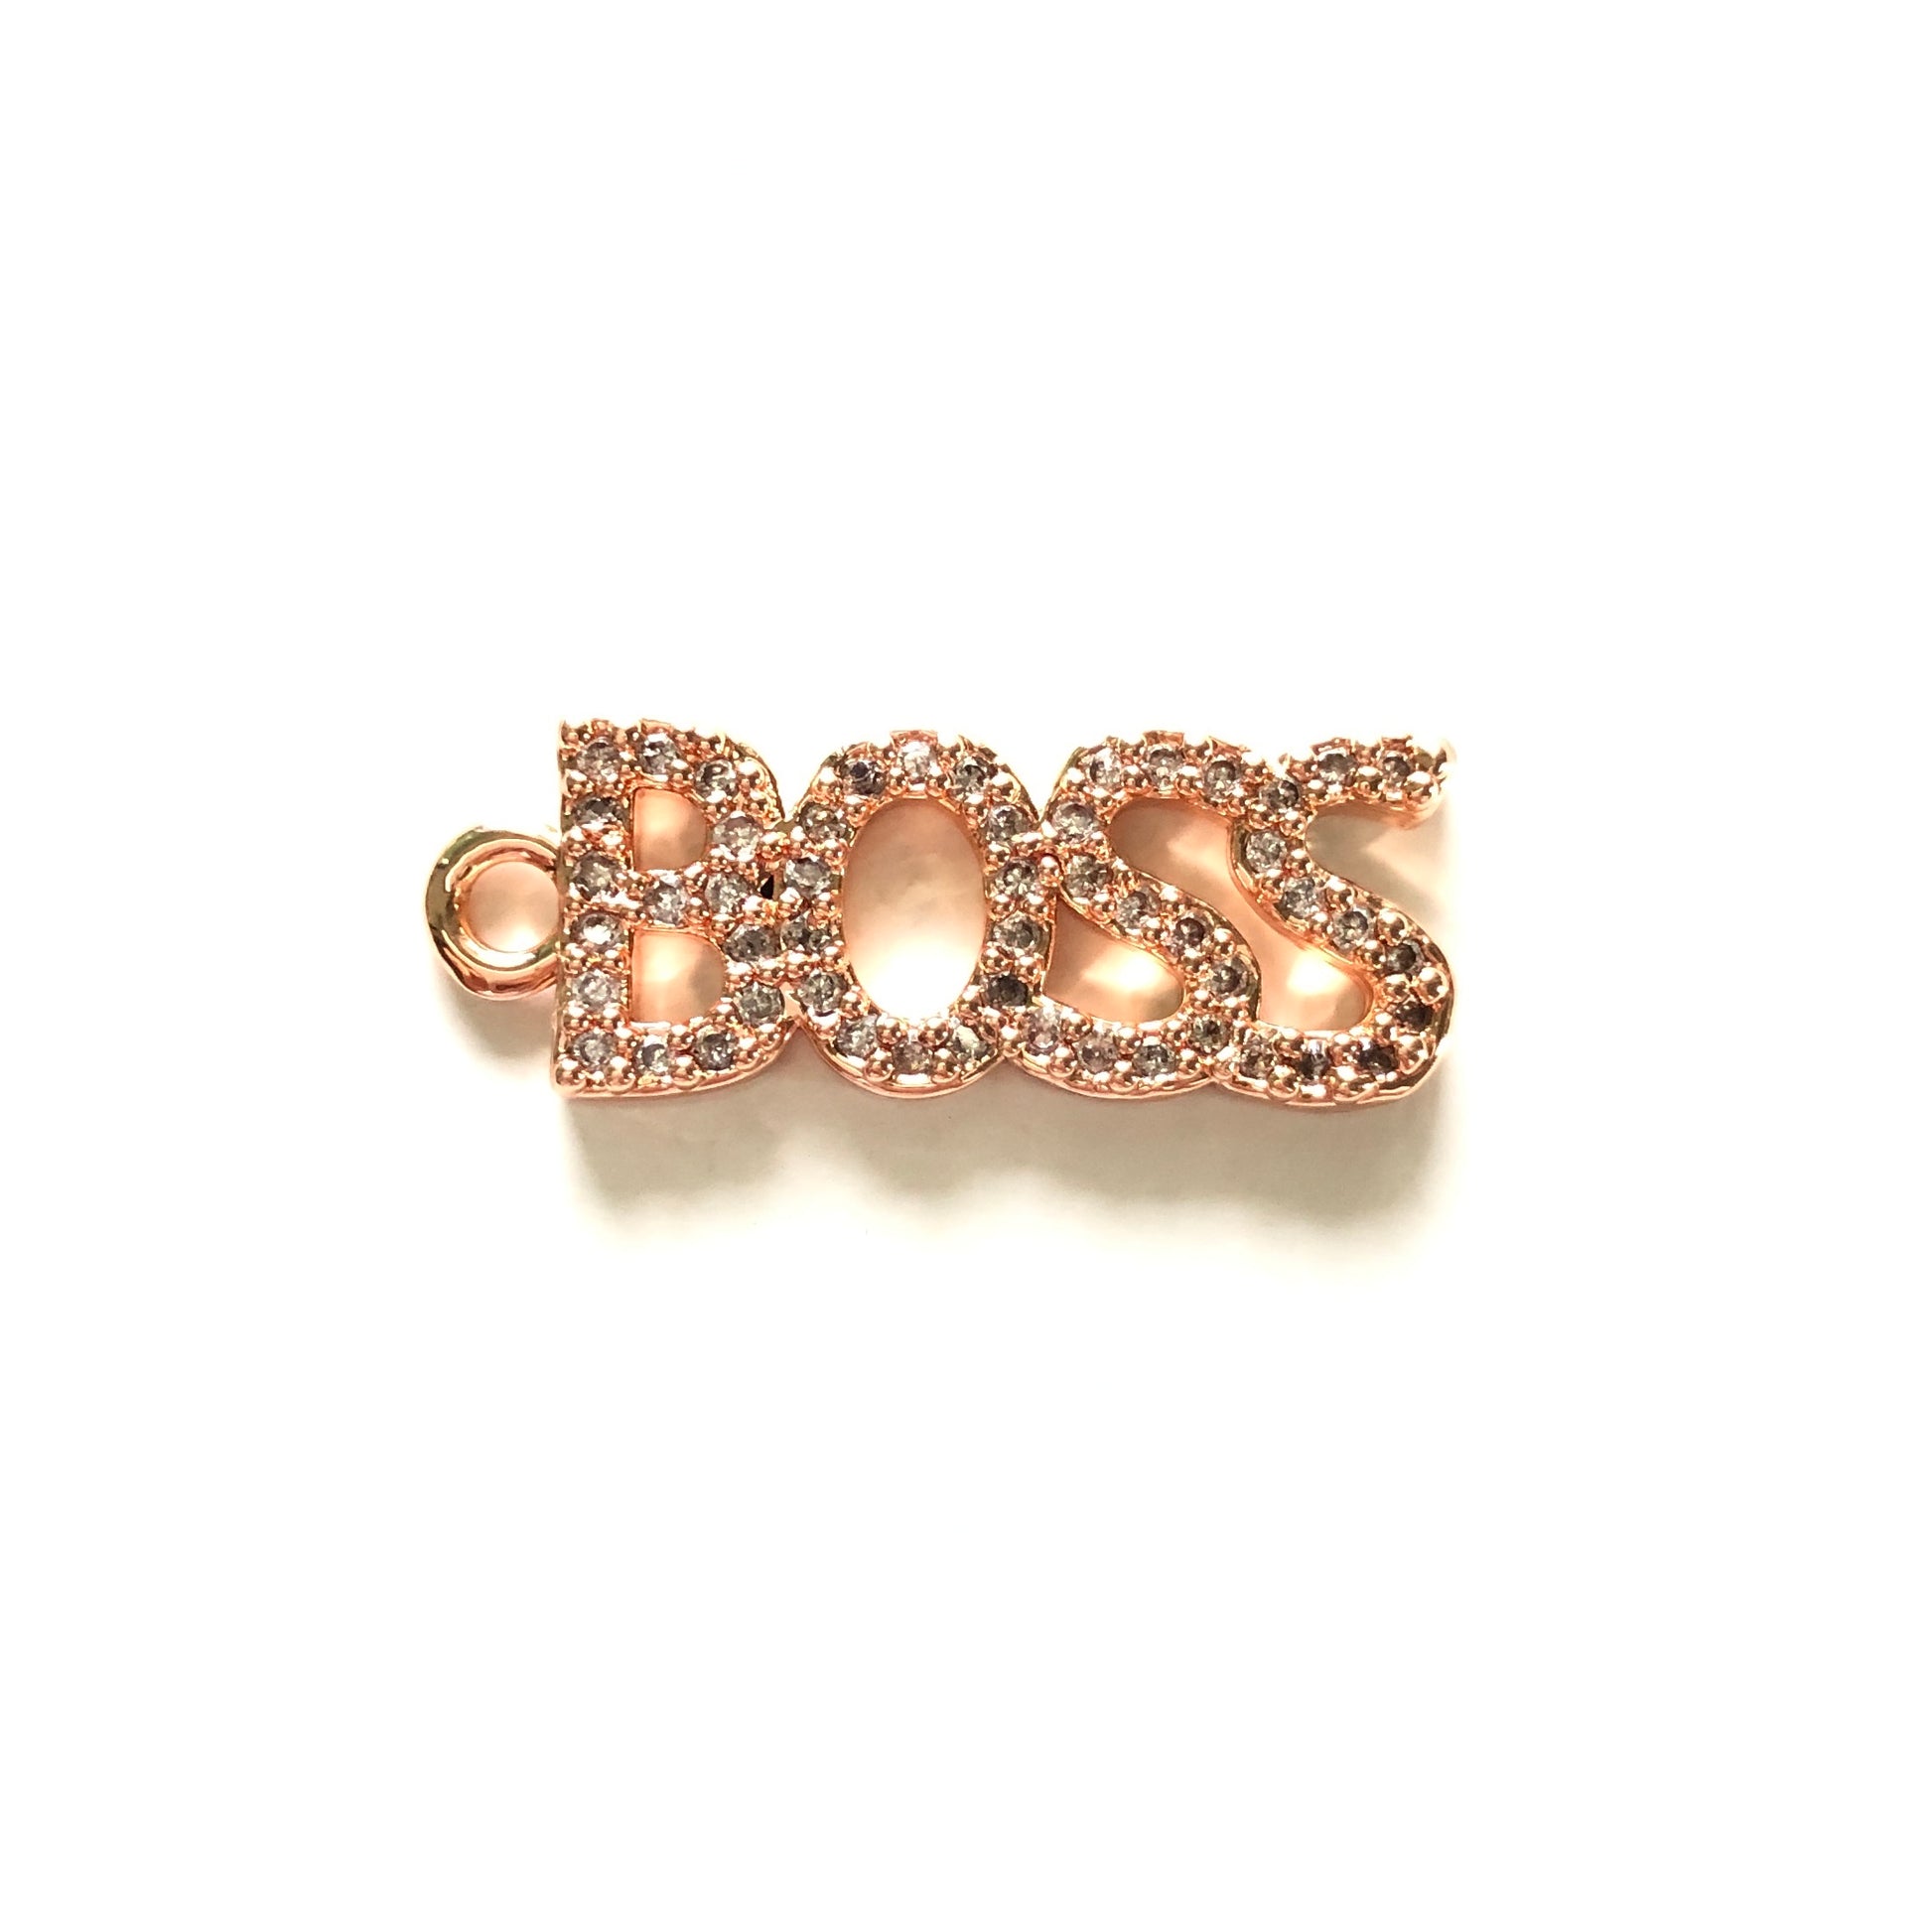 10pcs/lot 30*12mm CZ Paved Boss Charms Rose Gold CZ Paved Charms On Sale Words & Quotes Charms Beads Beyond